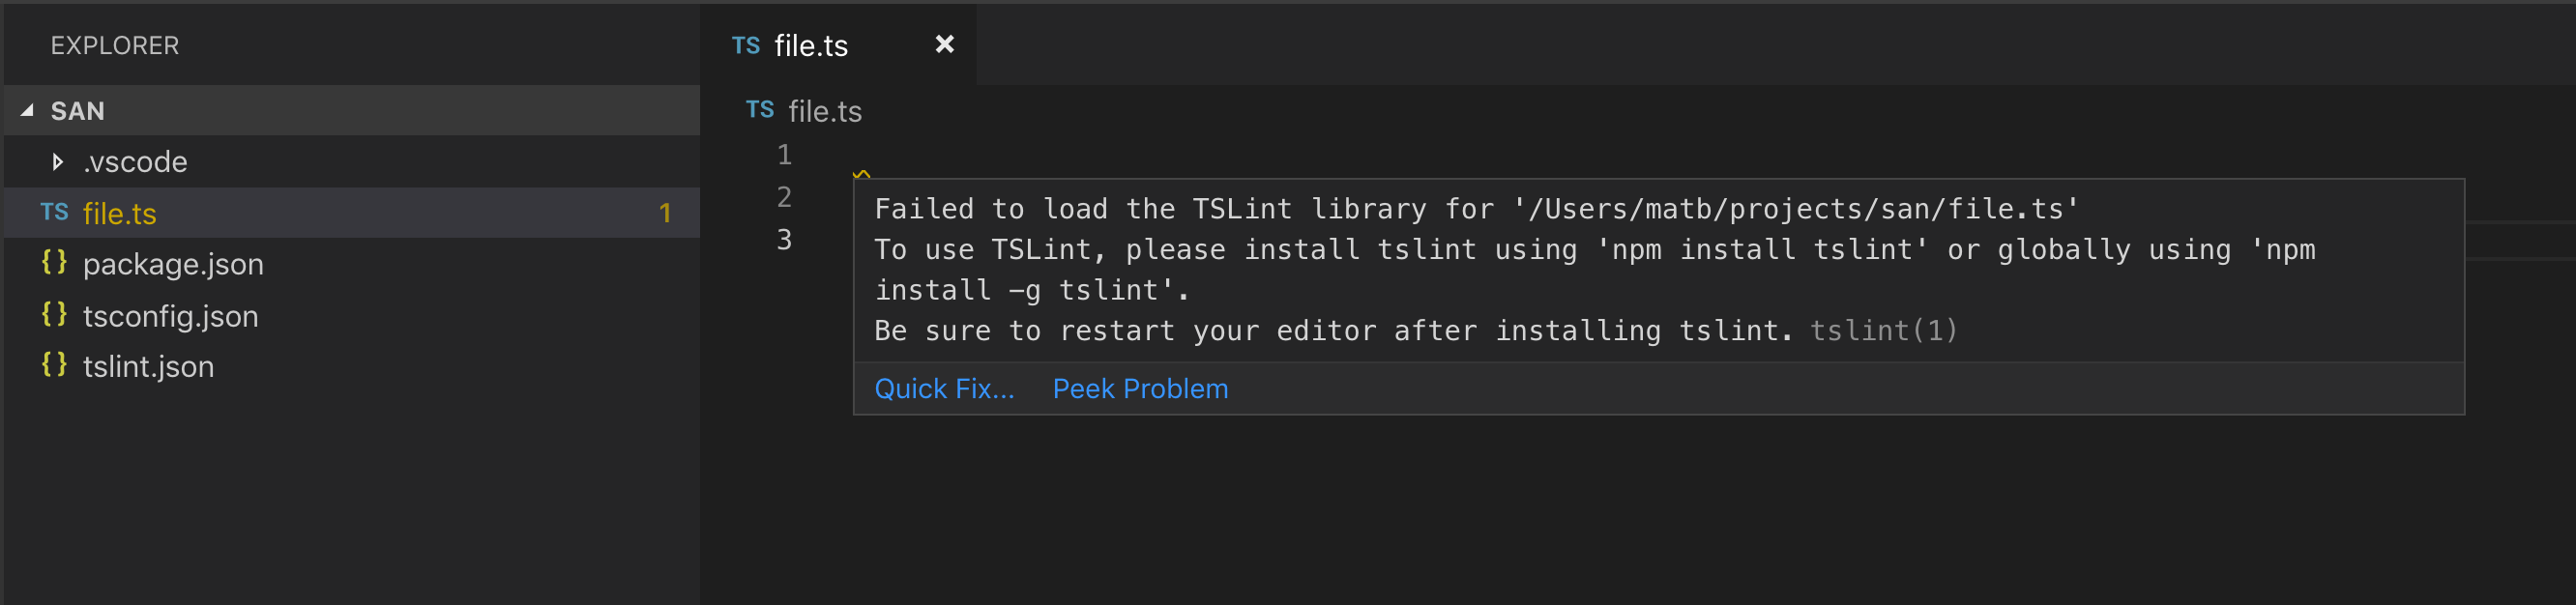 TSLint config error on first line of editor